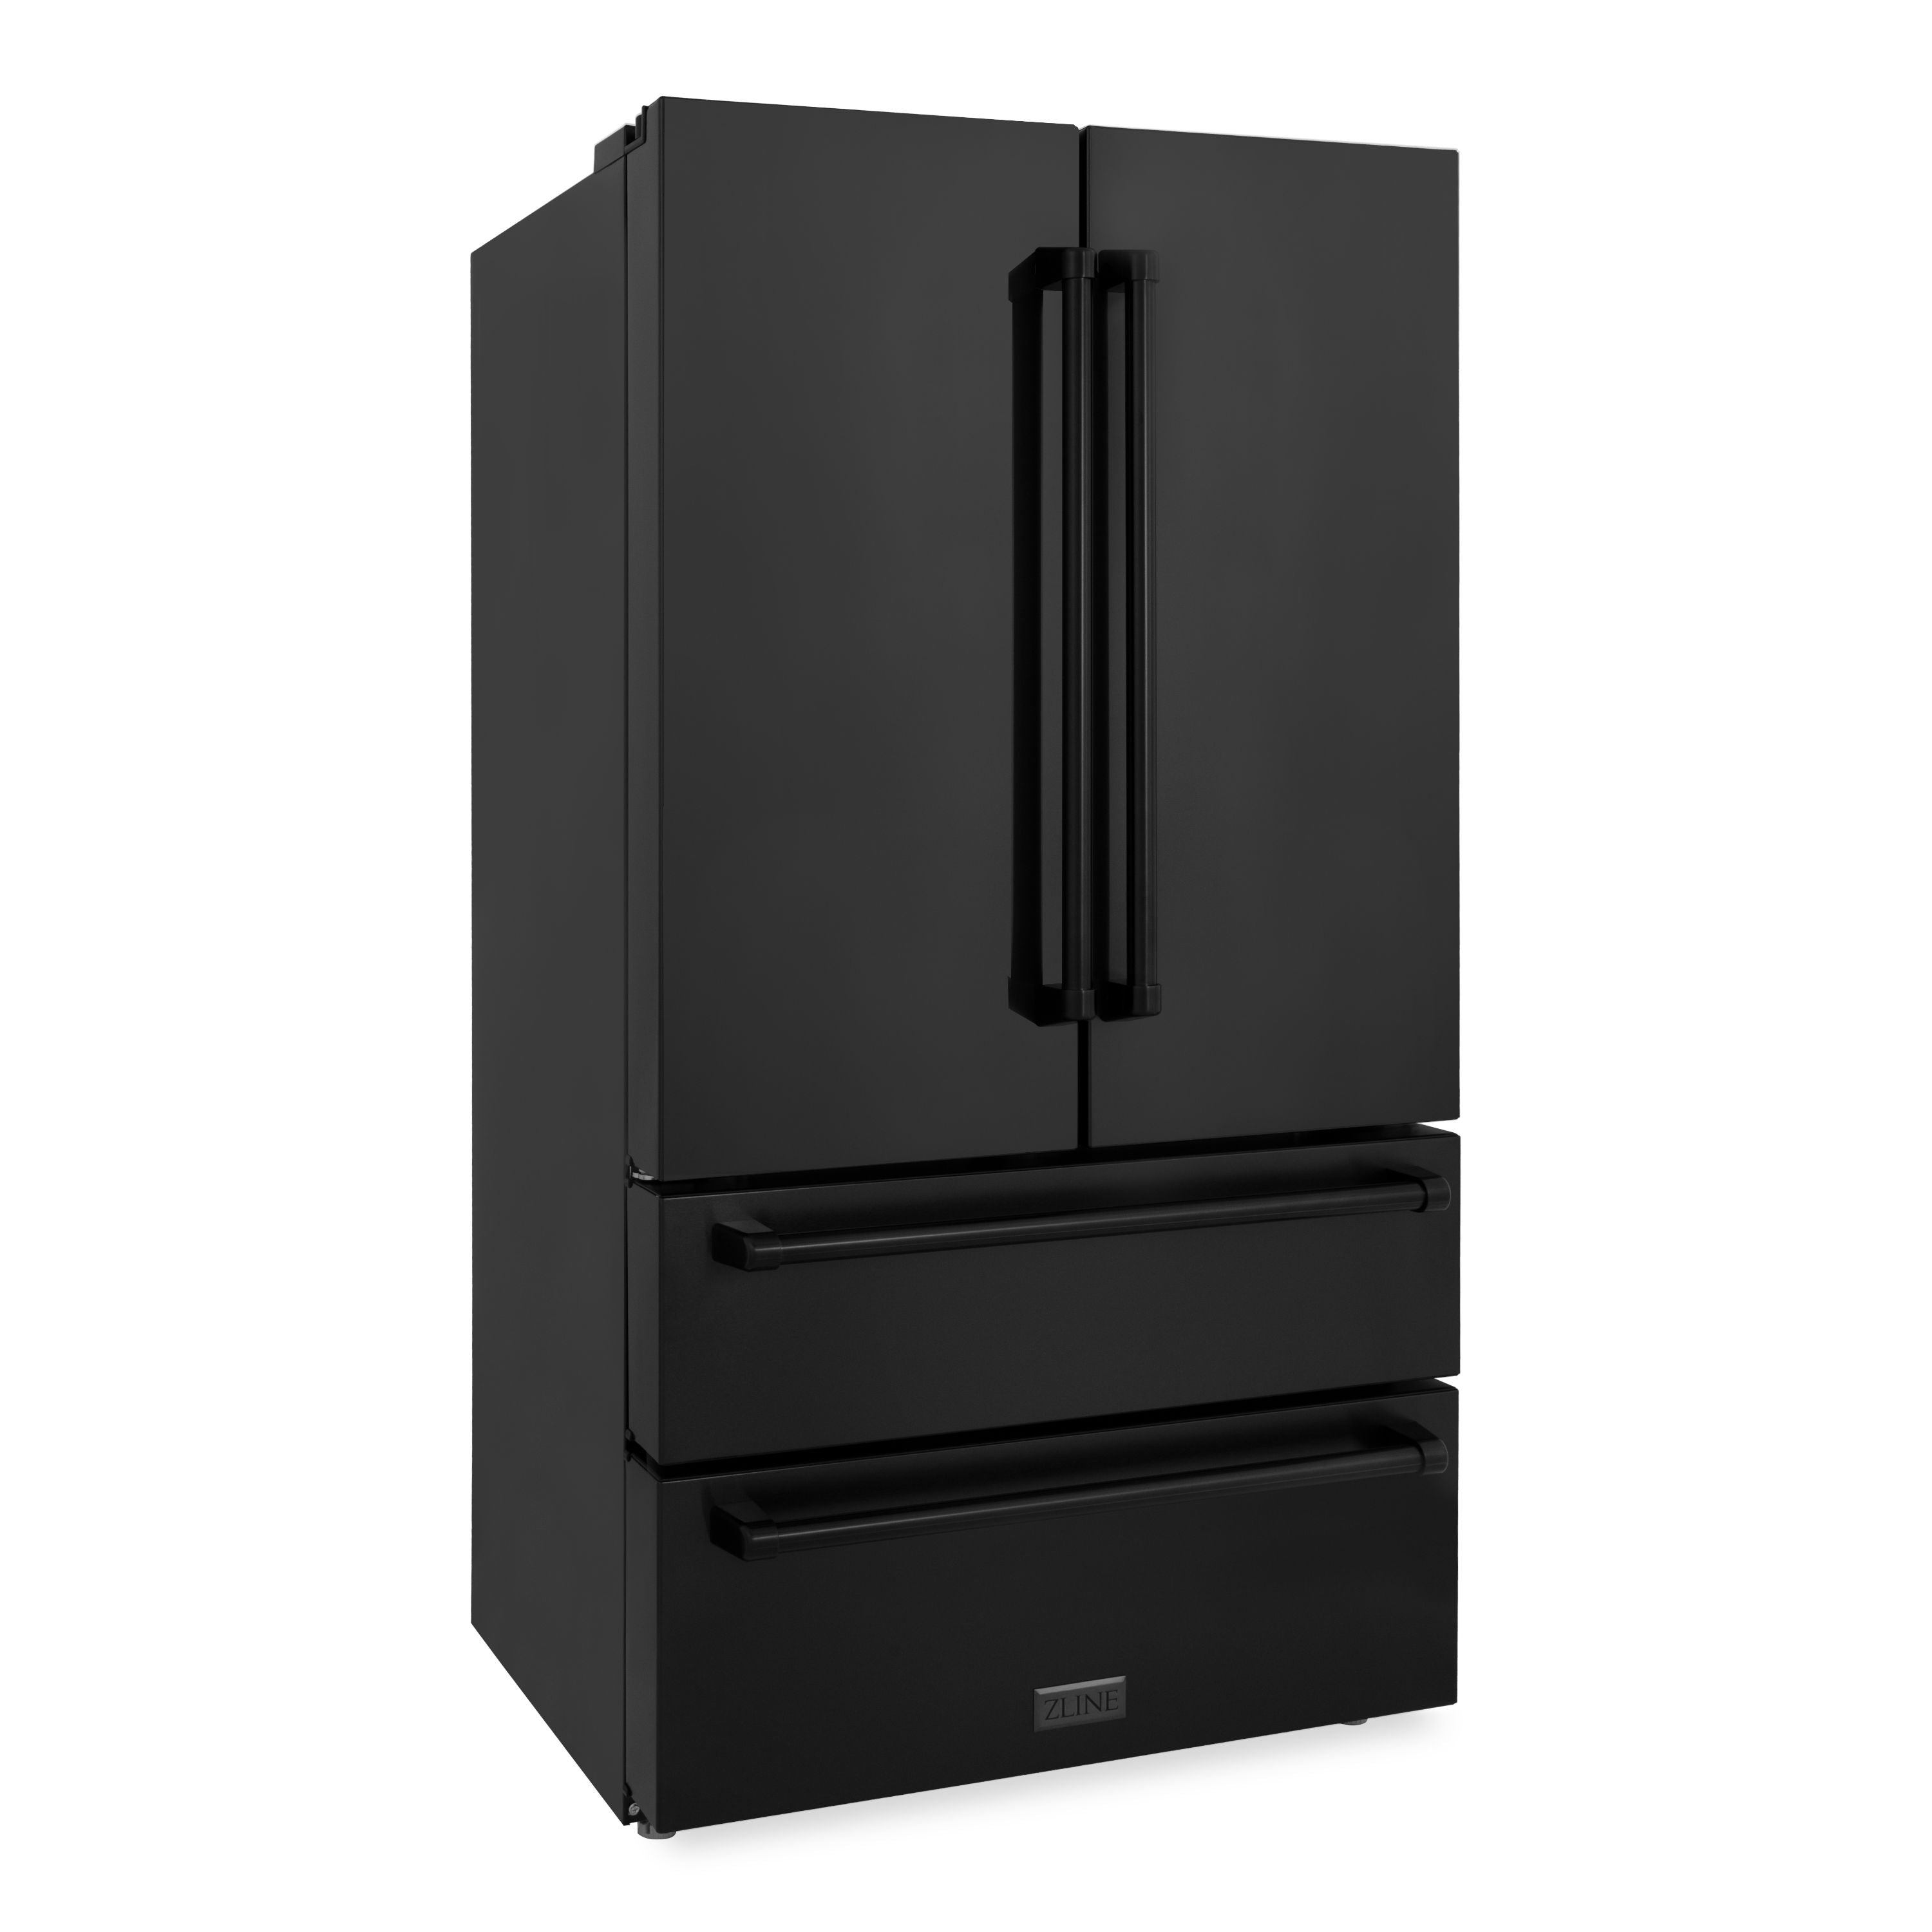 ZLINE 36 inch 22.5 cu. ft. French Door Refrigerator with Ice Maker in Black Stainless Steel